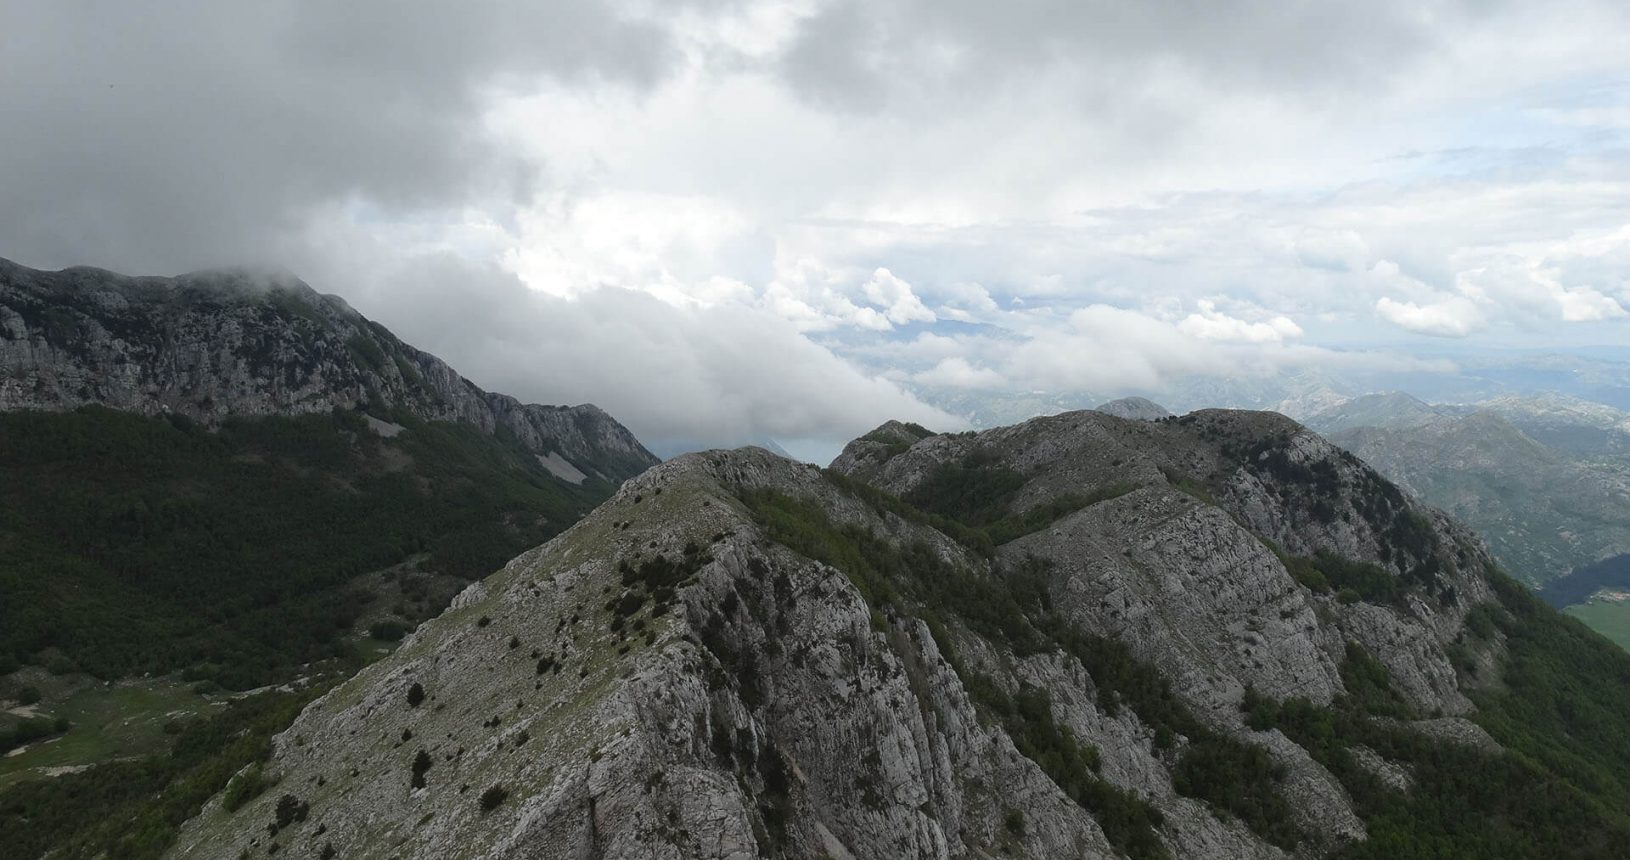 Very beautiful mountains in Lovcen National Park